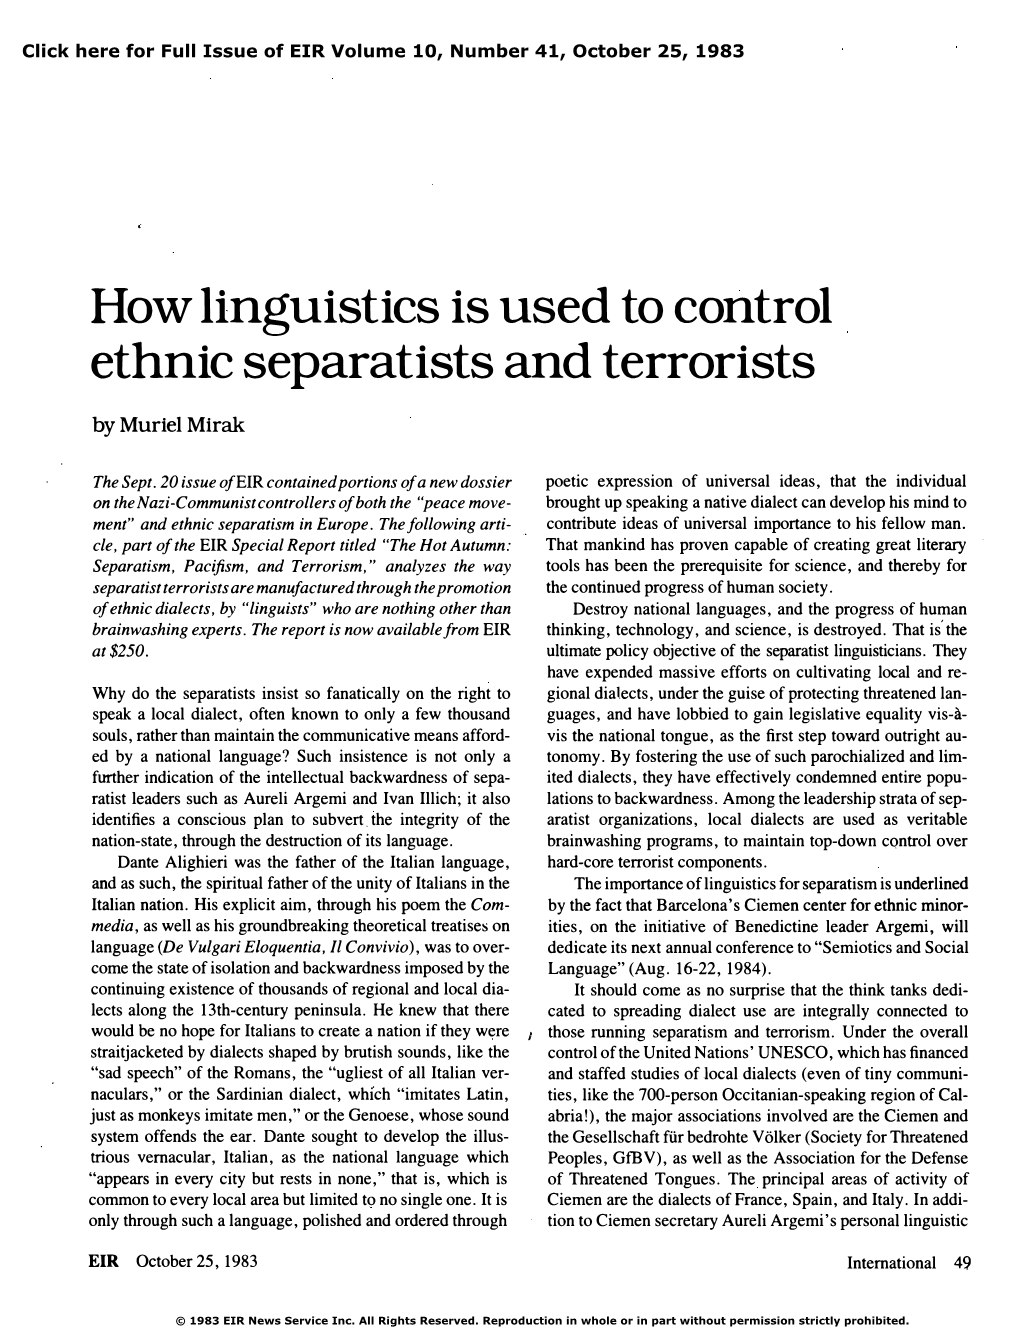 How Linguistics Is Used to Control Ethnic Separatists and Terrorists